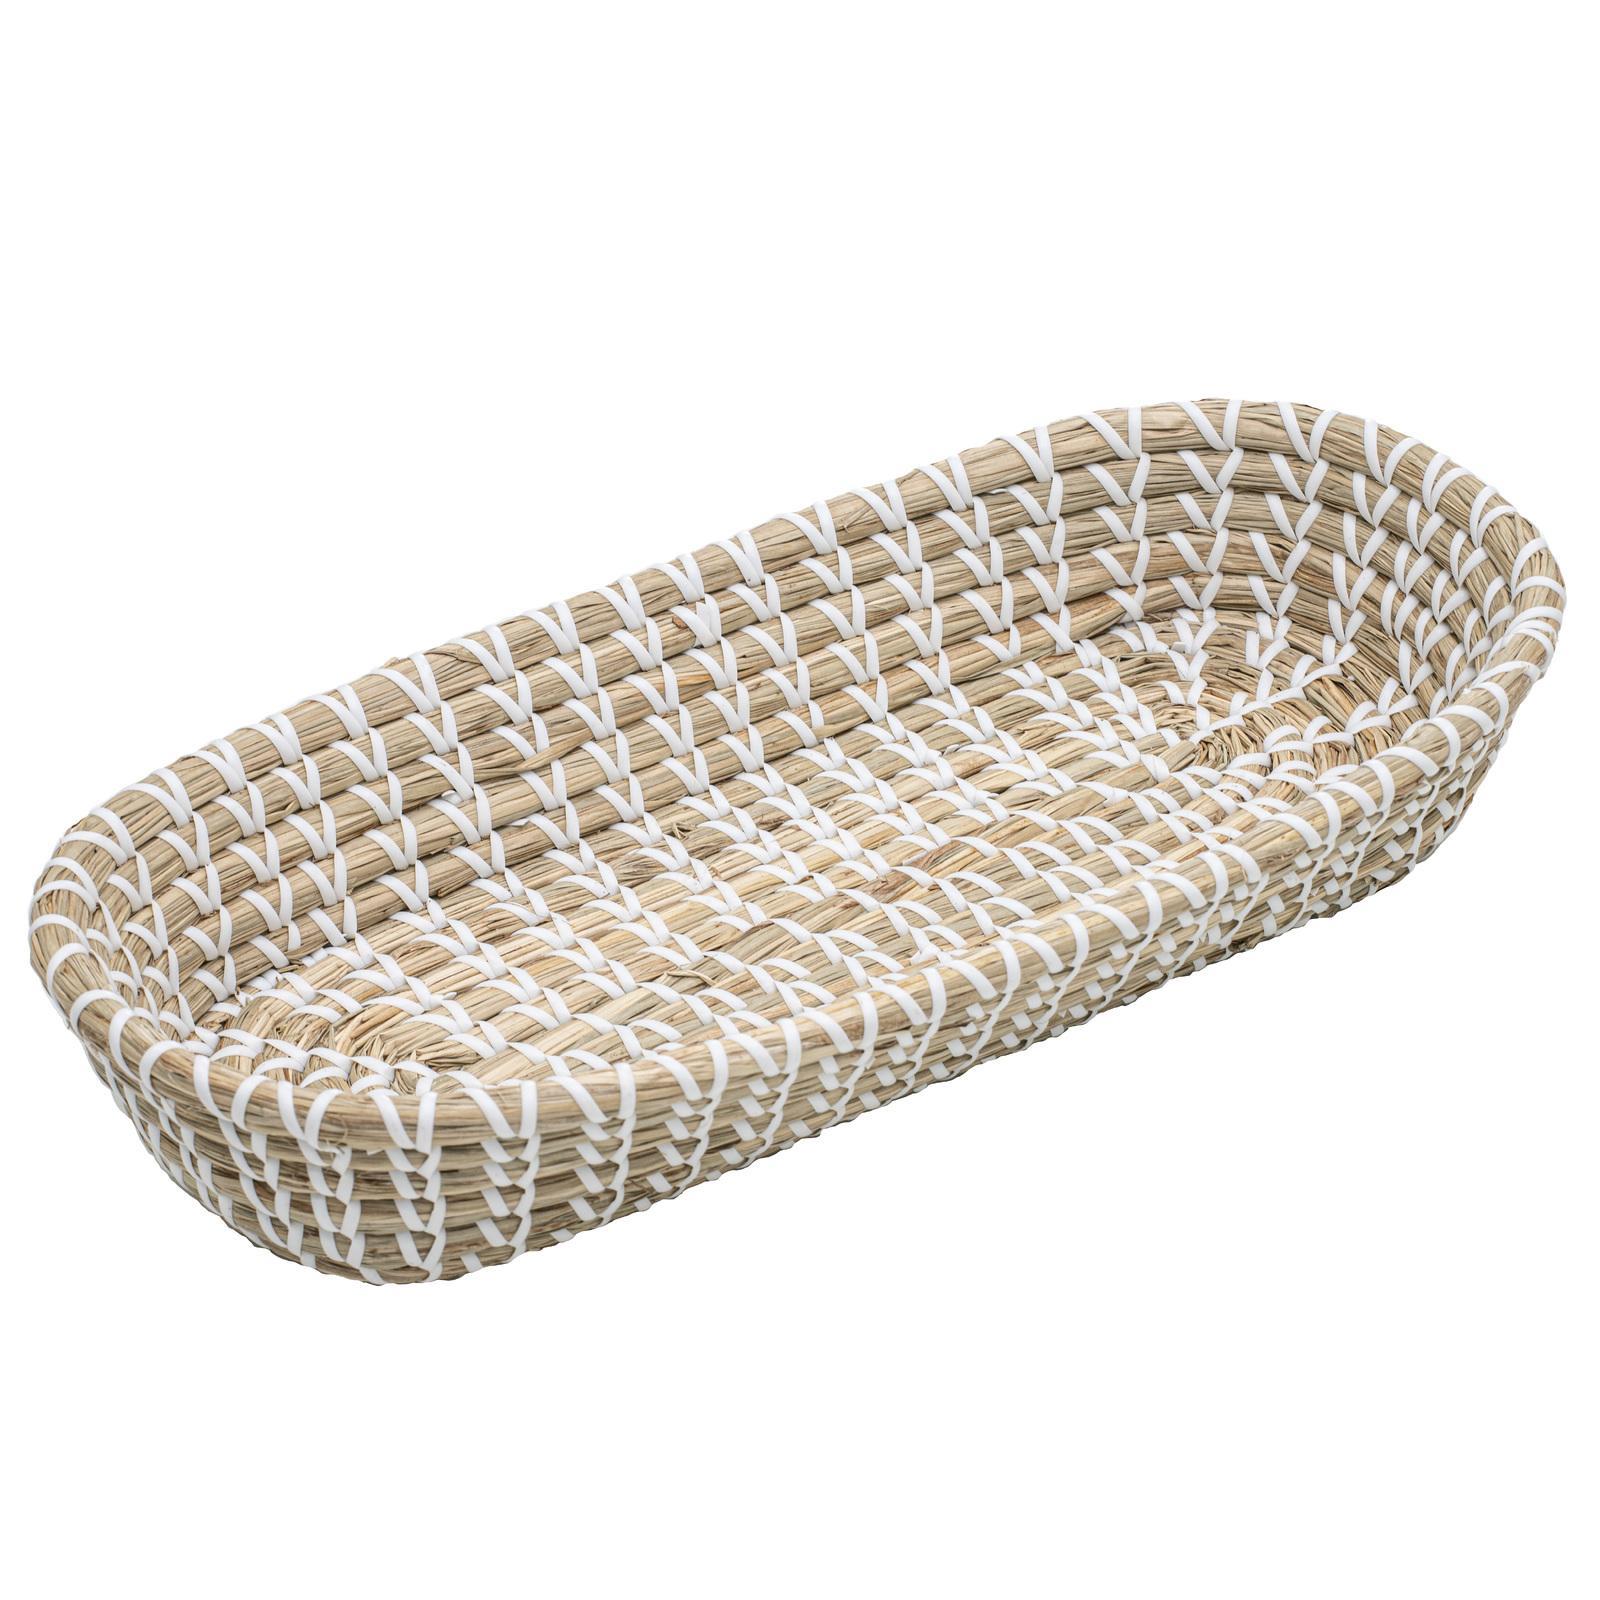 Ladelle Seagrass Woven Bakers/Pastries Handcrafted Tray 36x16.5x6.5cm White